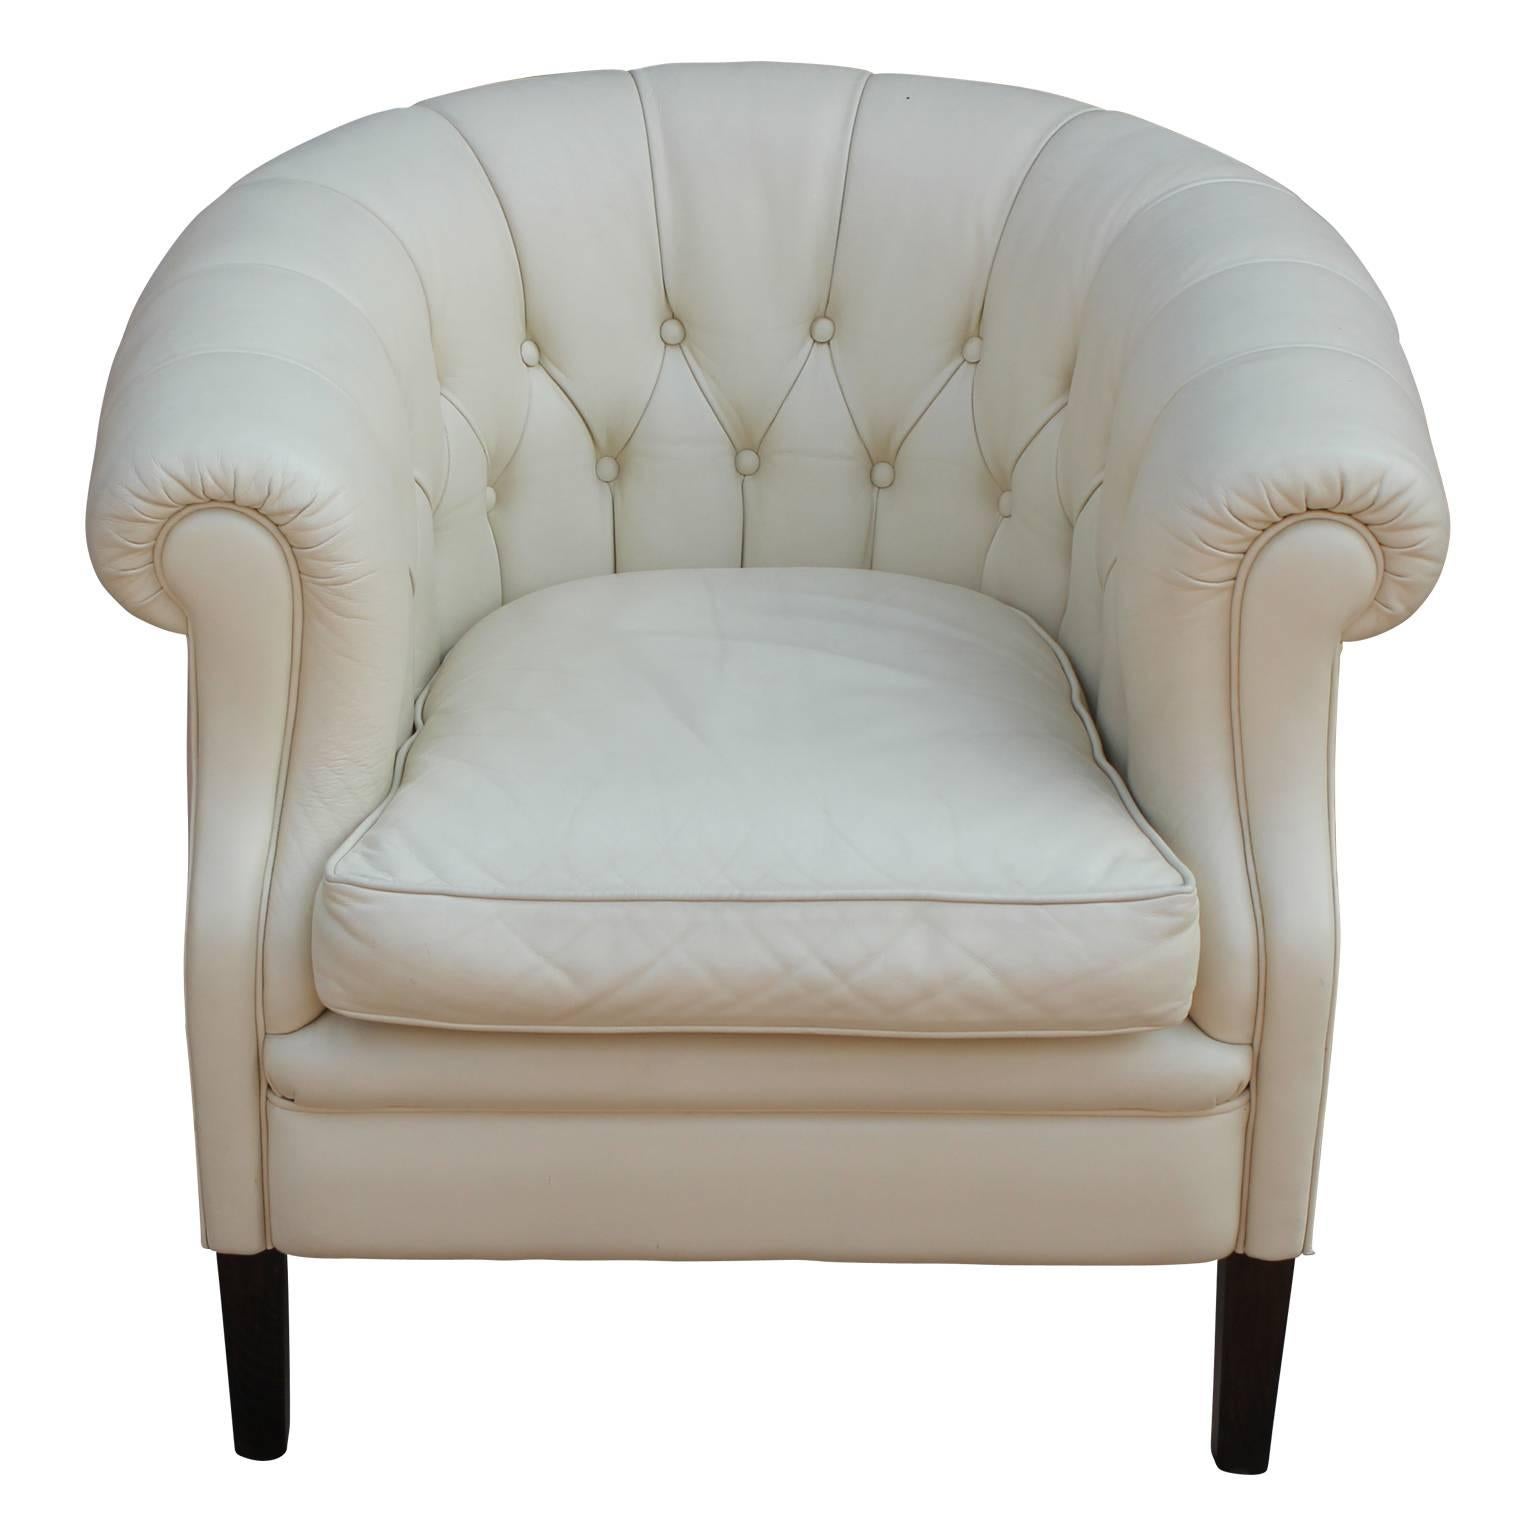 Pair of modern white leather tufted Chesterfield style lounge chairs with black legs. Hollywood Regency style.